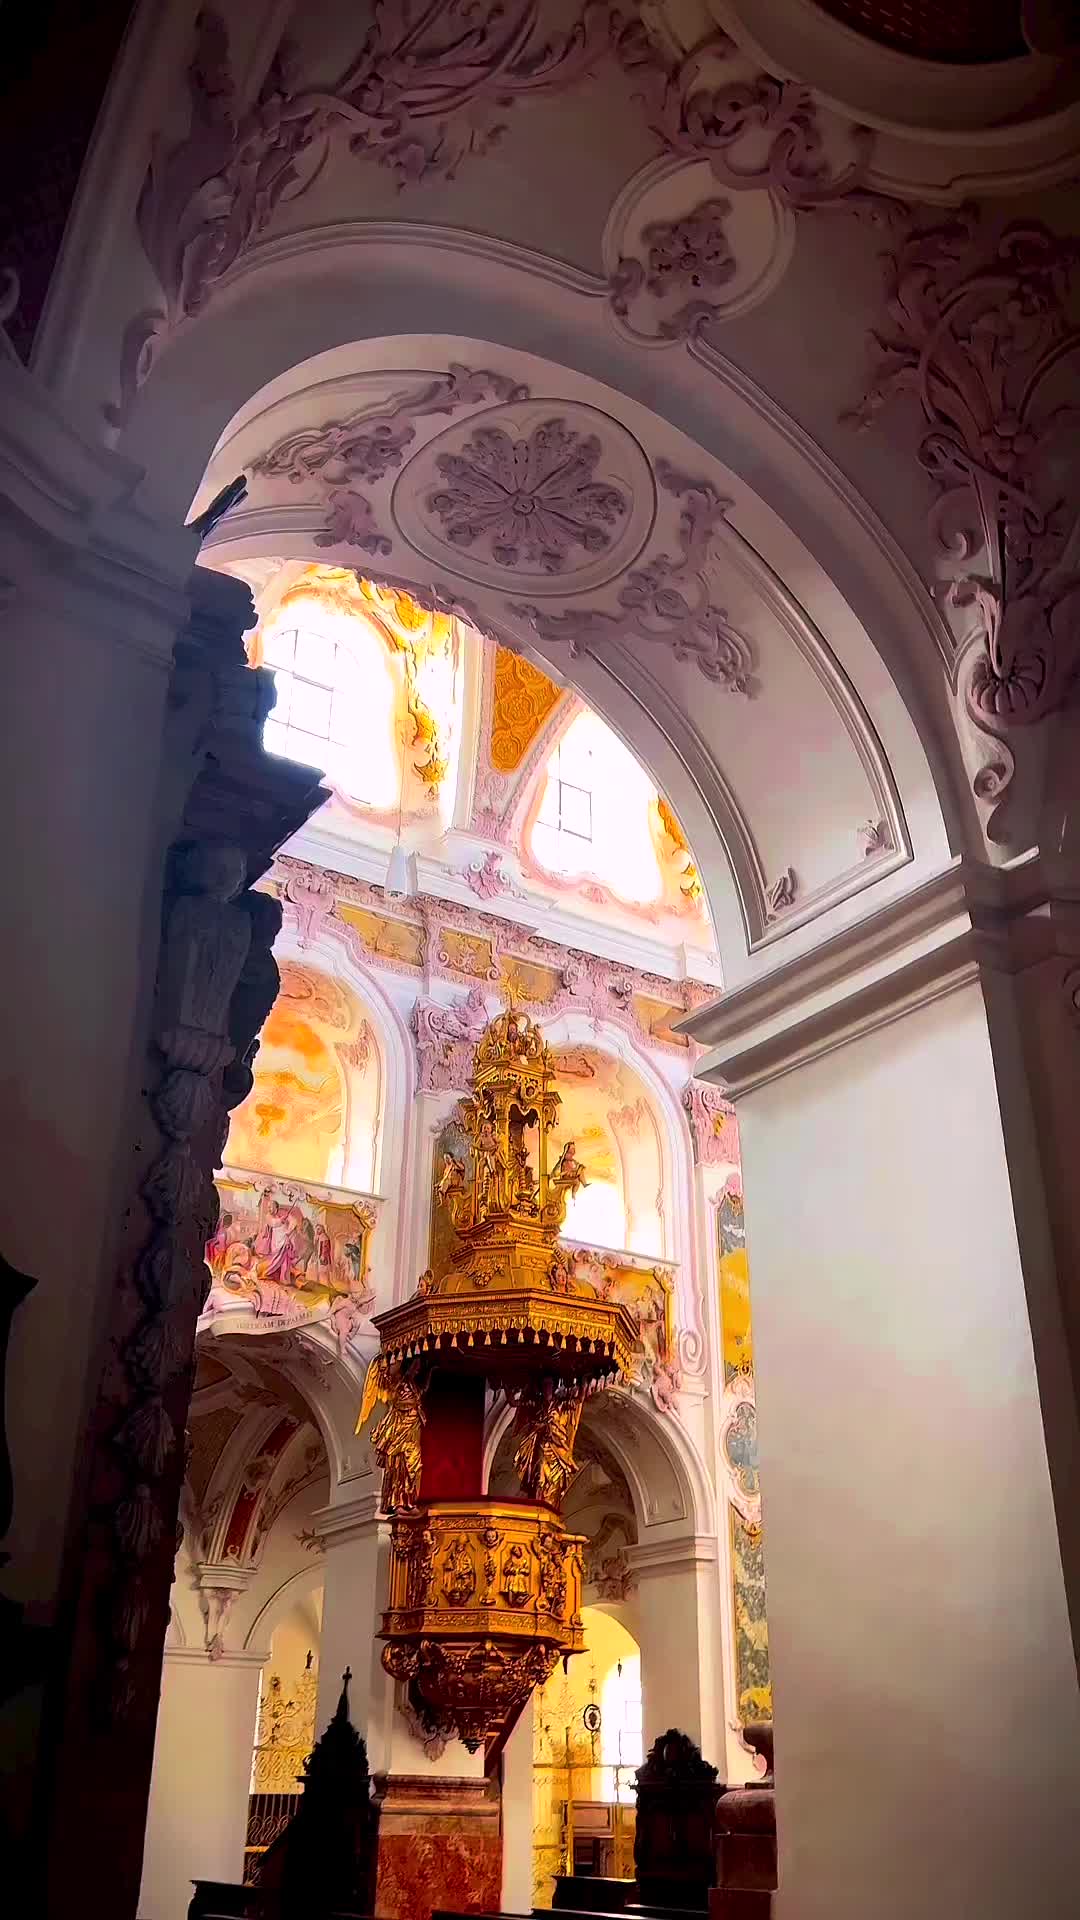 The Art Of Asam - Part 8: Baroque Masterpiece in Freising